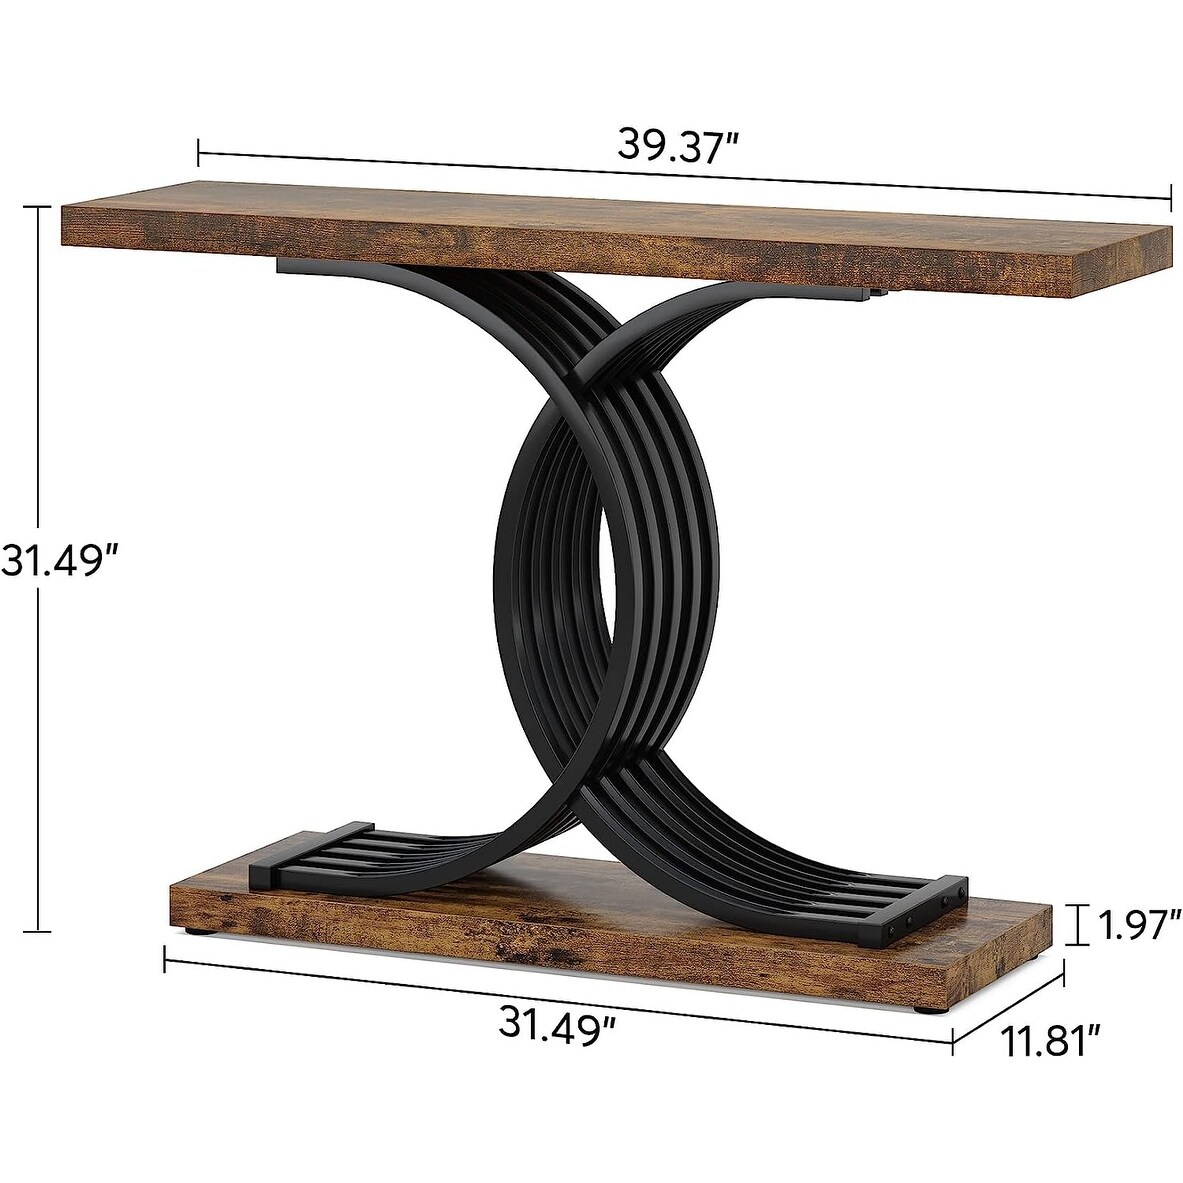 Console Table, Faux Marble Hallway Table with Geometric Metal Legs - 11.81"D x 39.37"W x 31.49"H